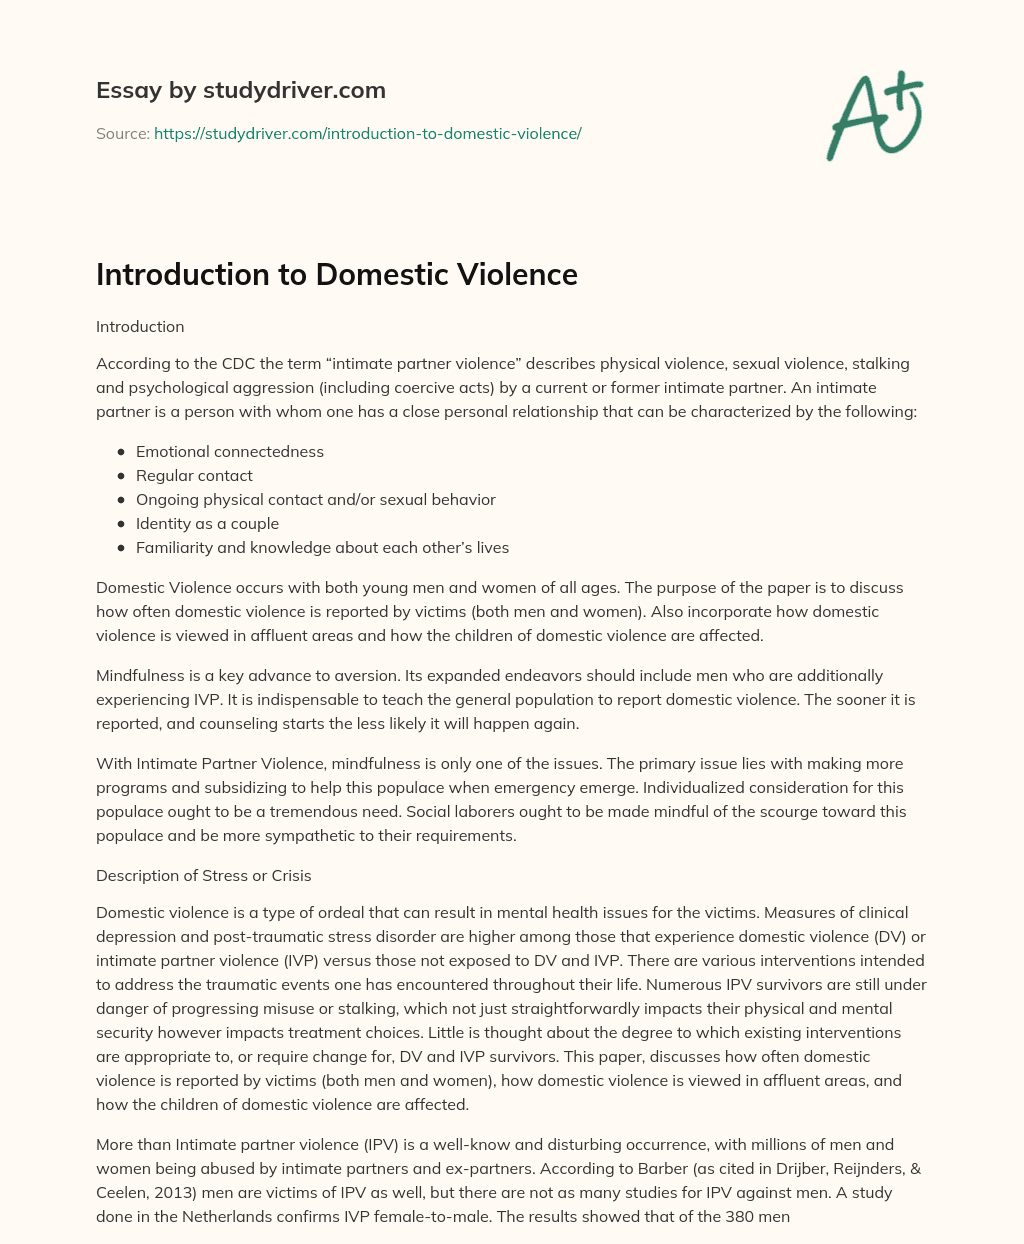 Introduction to Domestic Violence essay